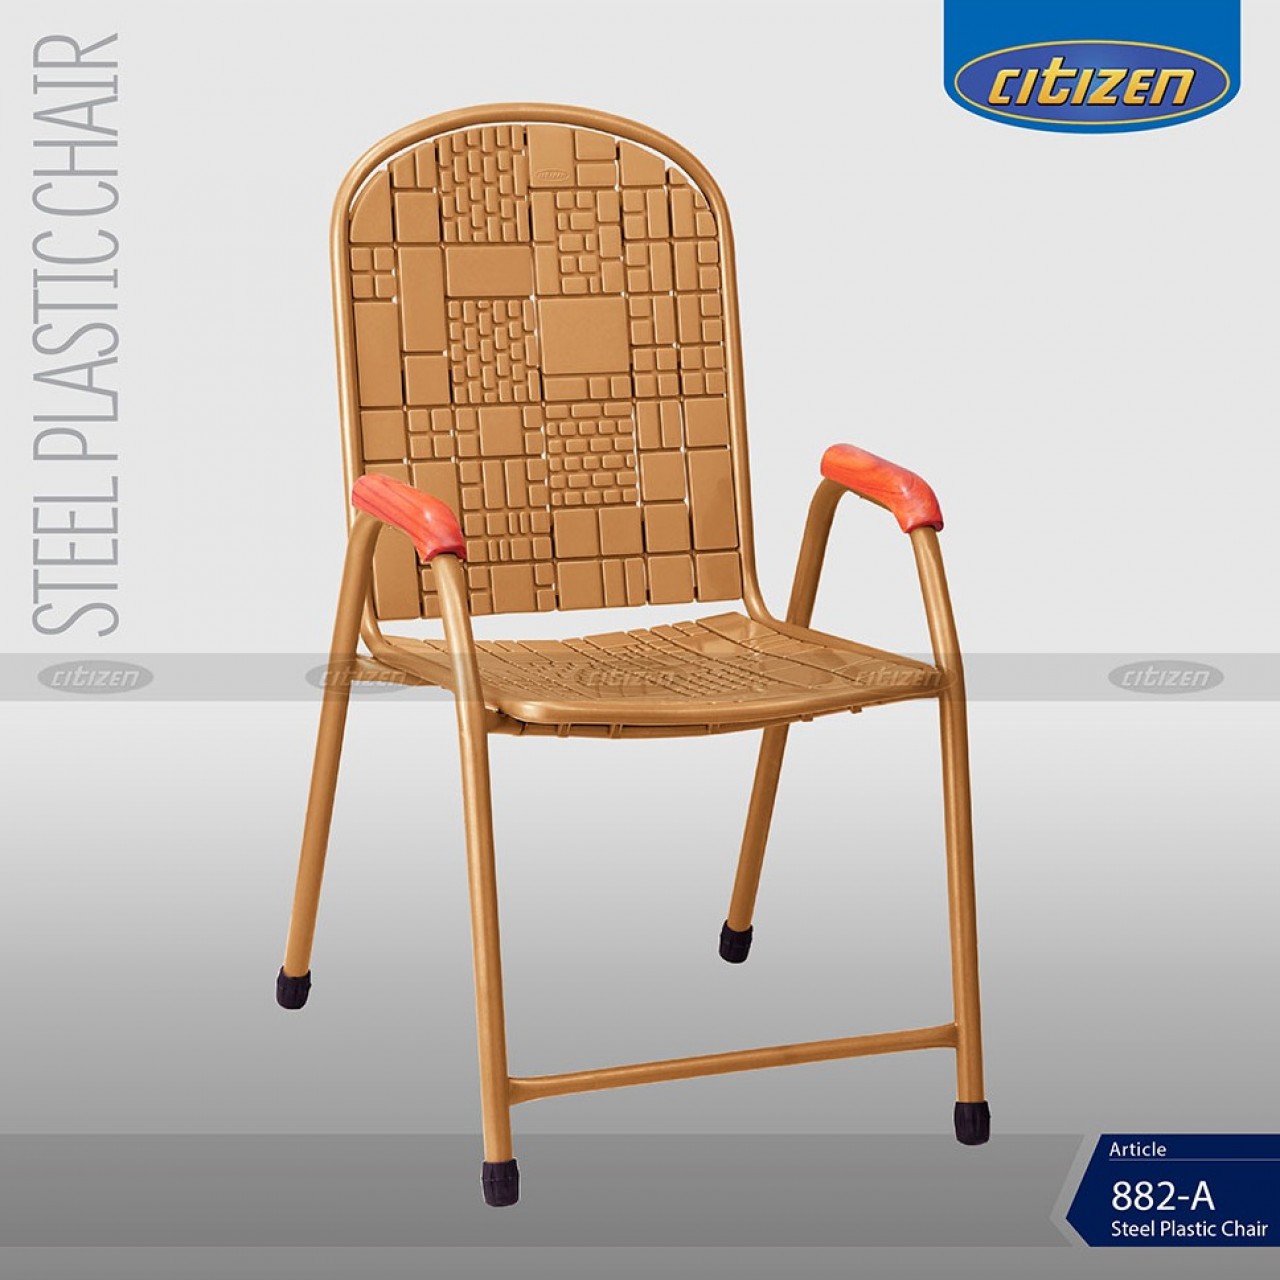 Citizen 882-A Steel & Plastic Chair - With Arms